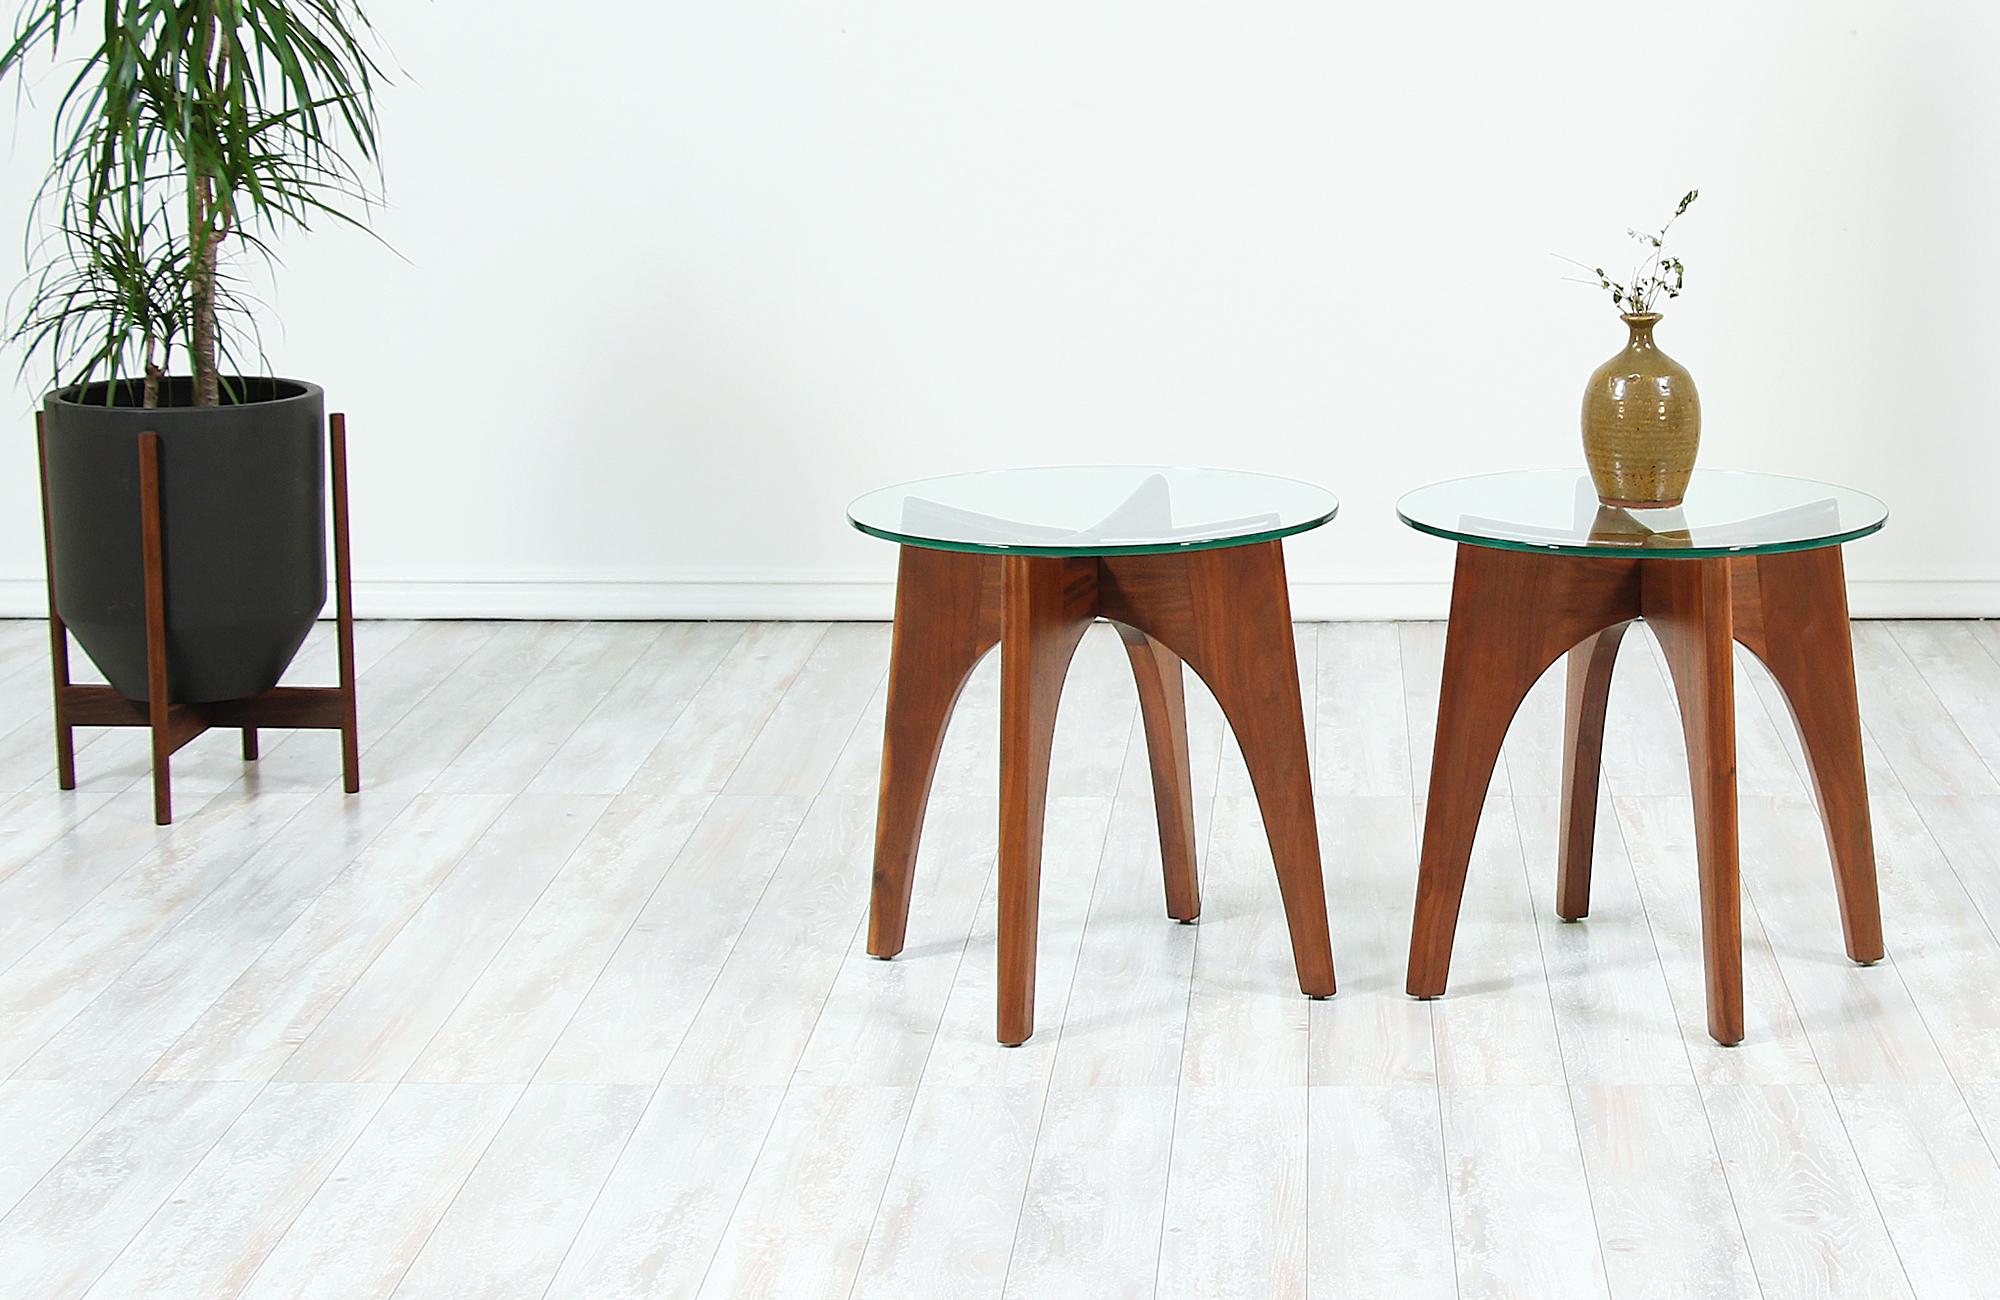 Pair of sculpted side tables designed by Adrian Pearsall for Craft Associates in the United States, circa 1960s. These beautiful side tables feature an ‘X’ shaped walnut wood frame with an interlocked solid base that tightly holds the new circular